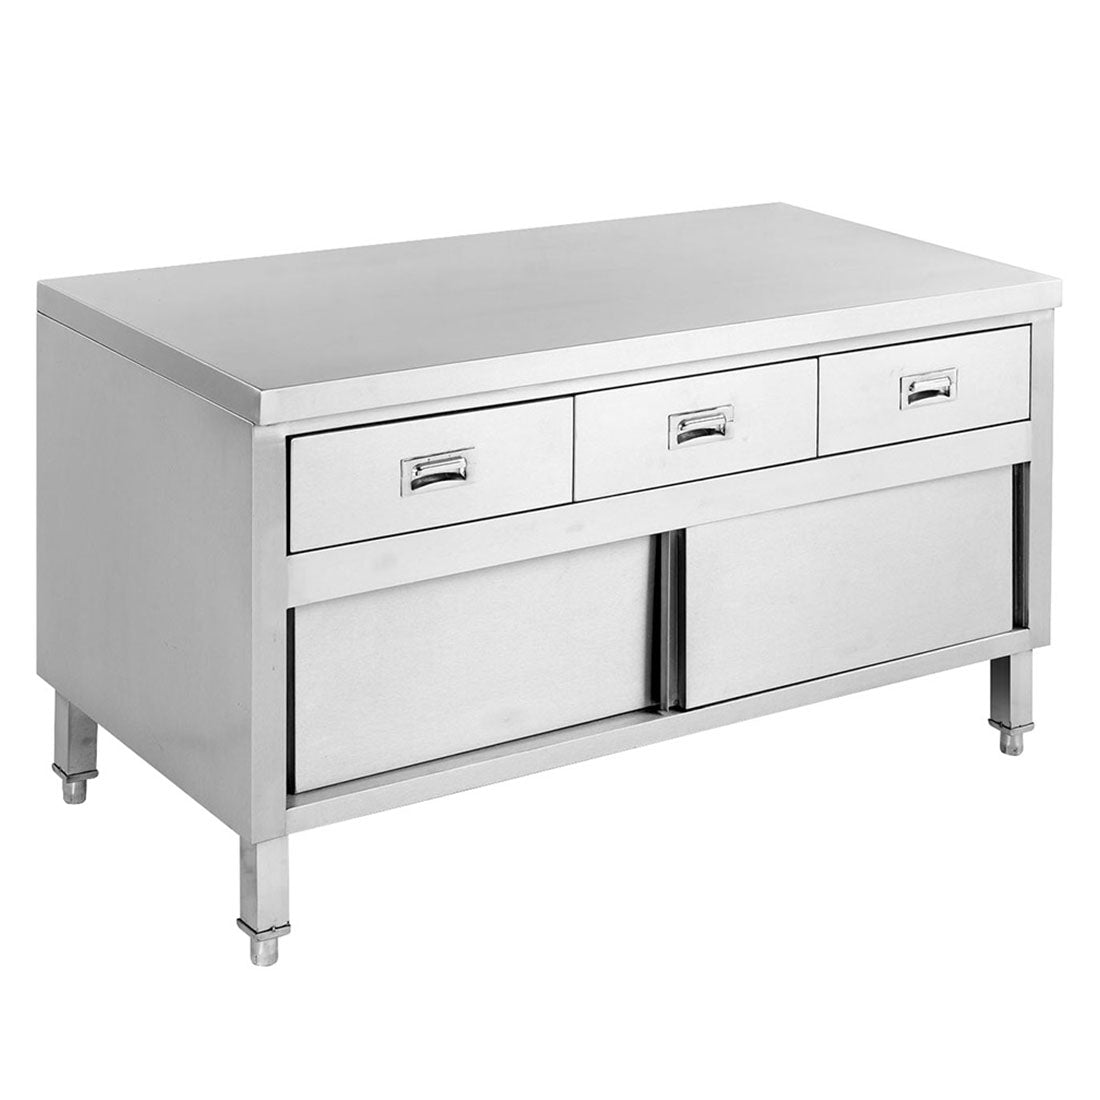 SKTD-1500 Bench cabinet with drawers - Cafe Supply